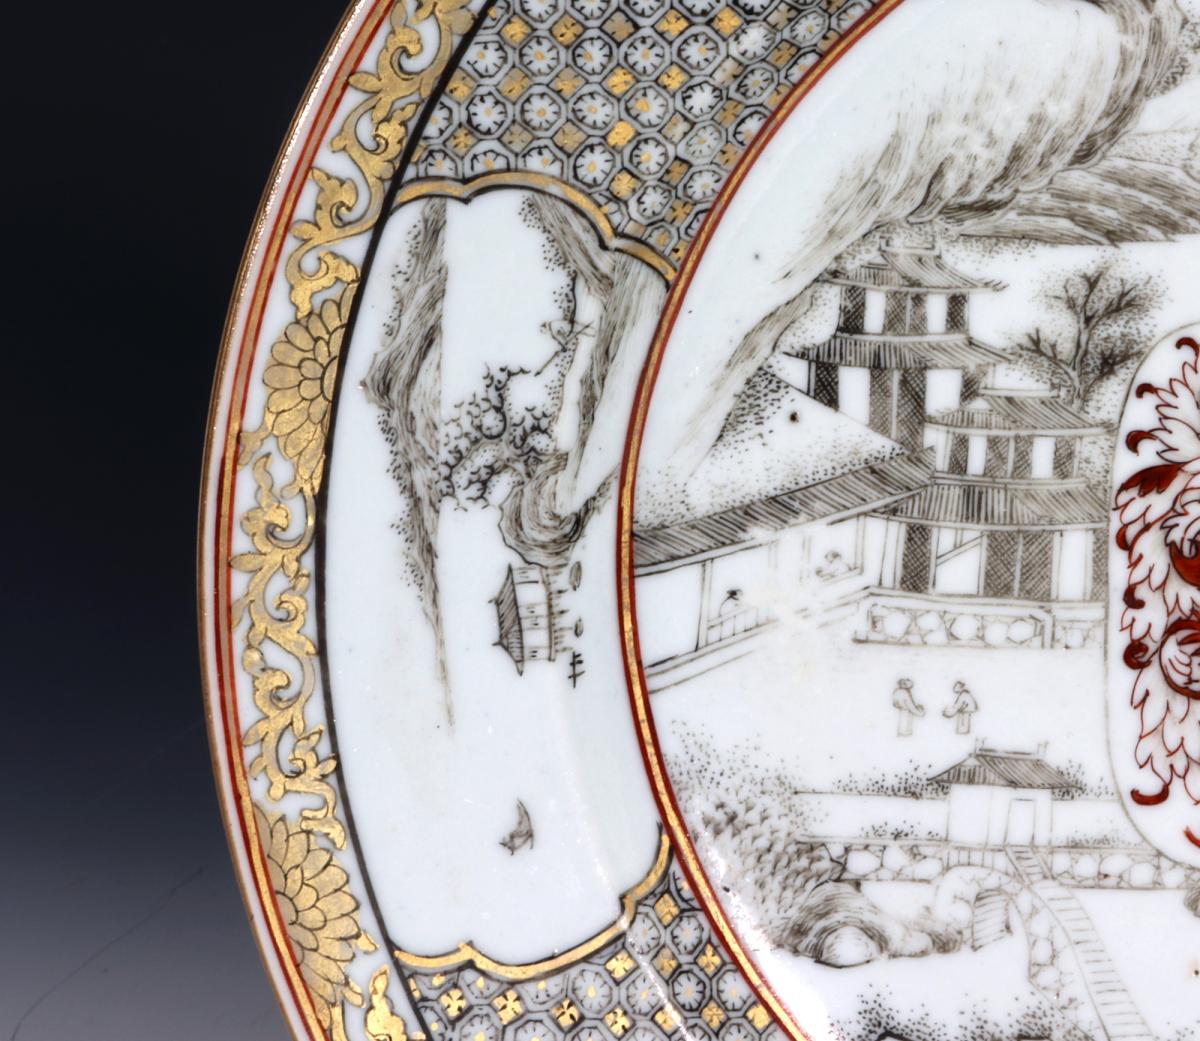 18th-century Yongzheng Chinese Export Porcelain Plate with Arms of Elwick of Middlesex